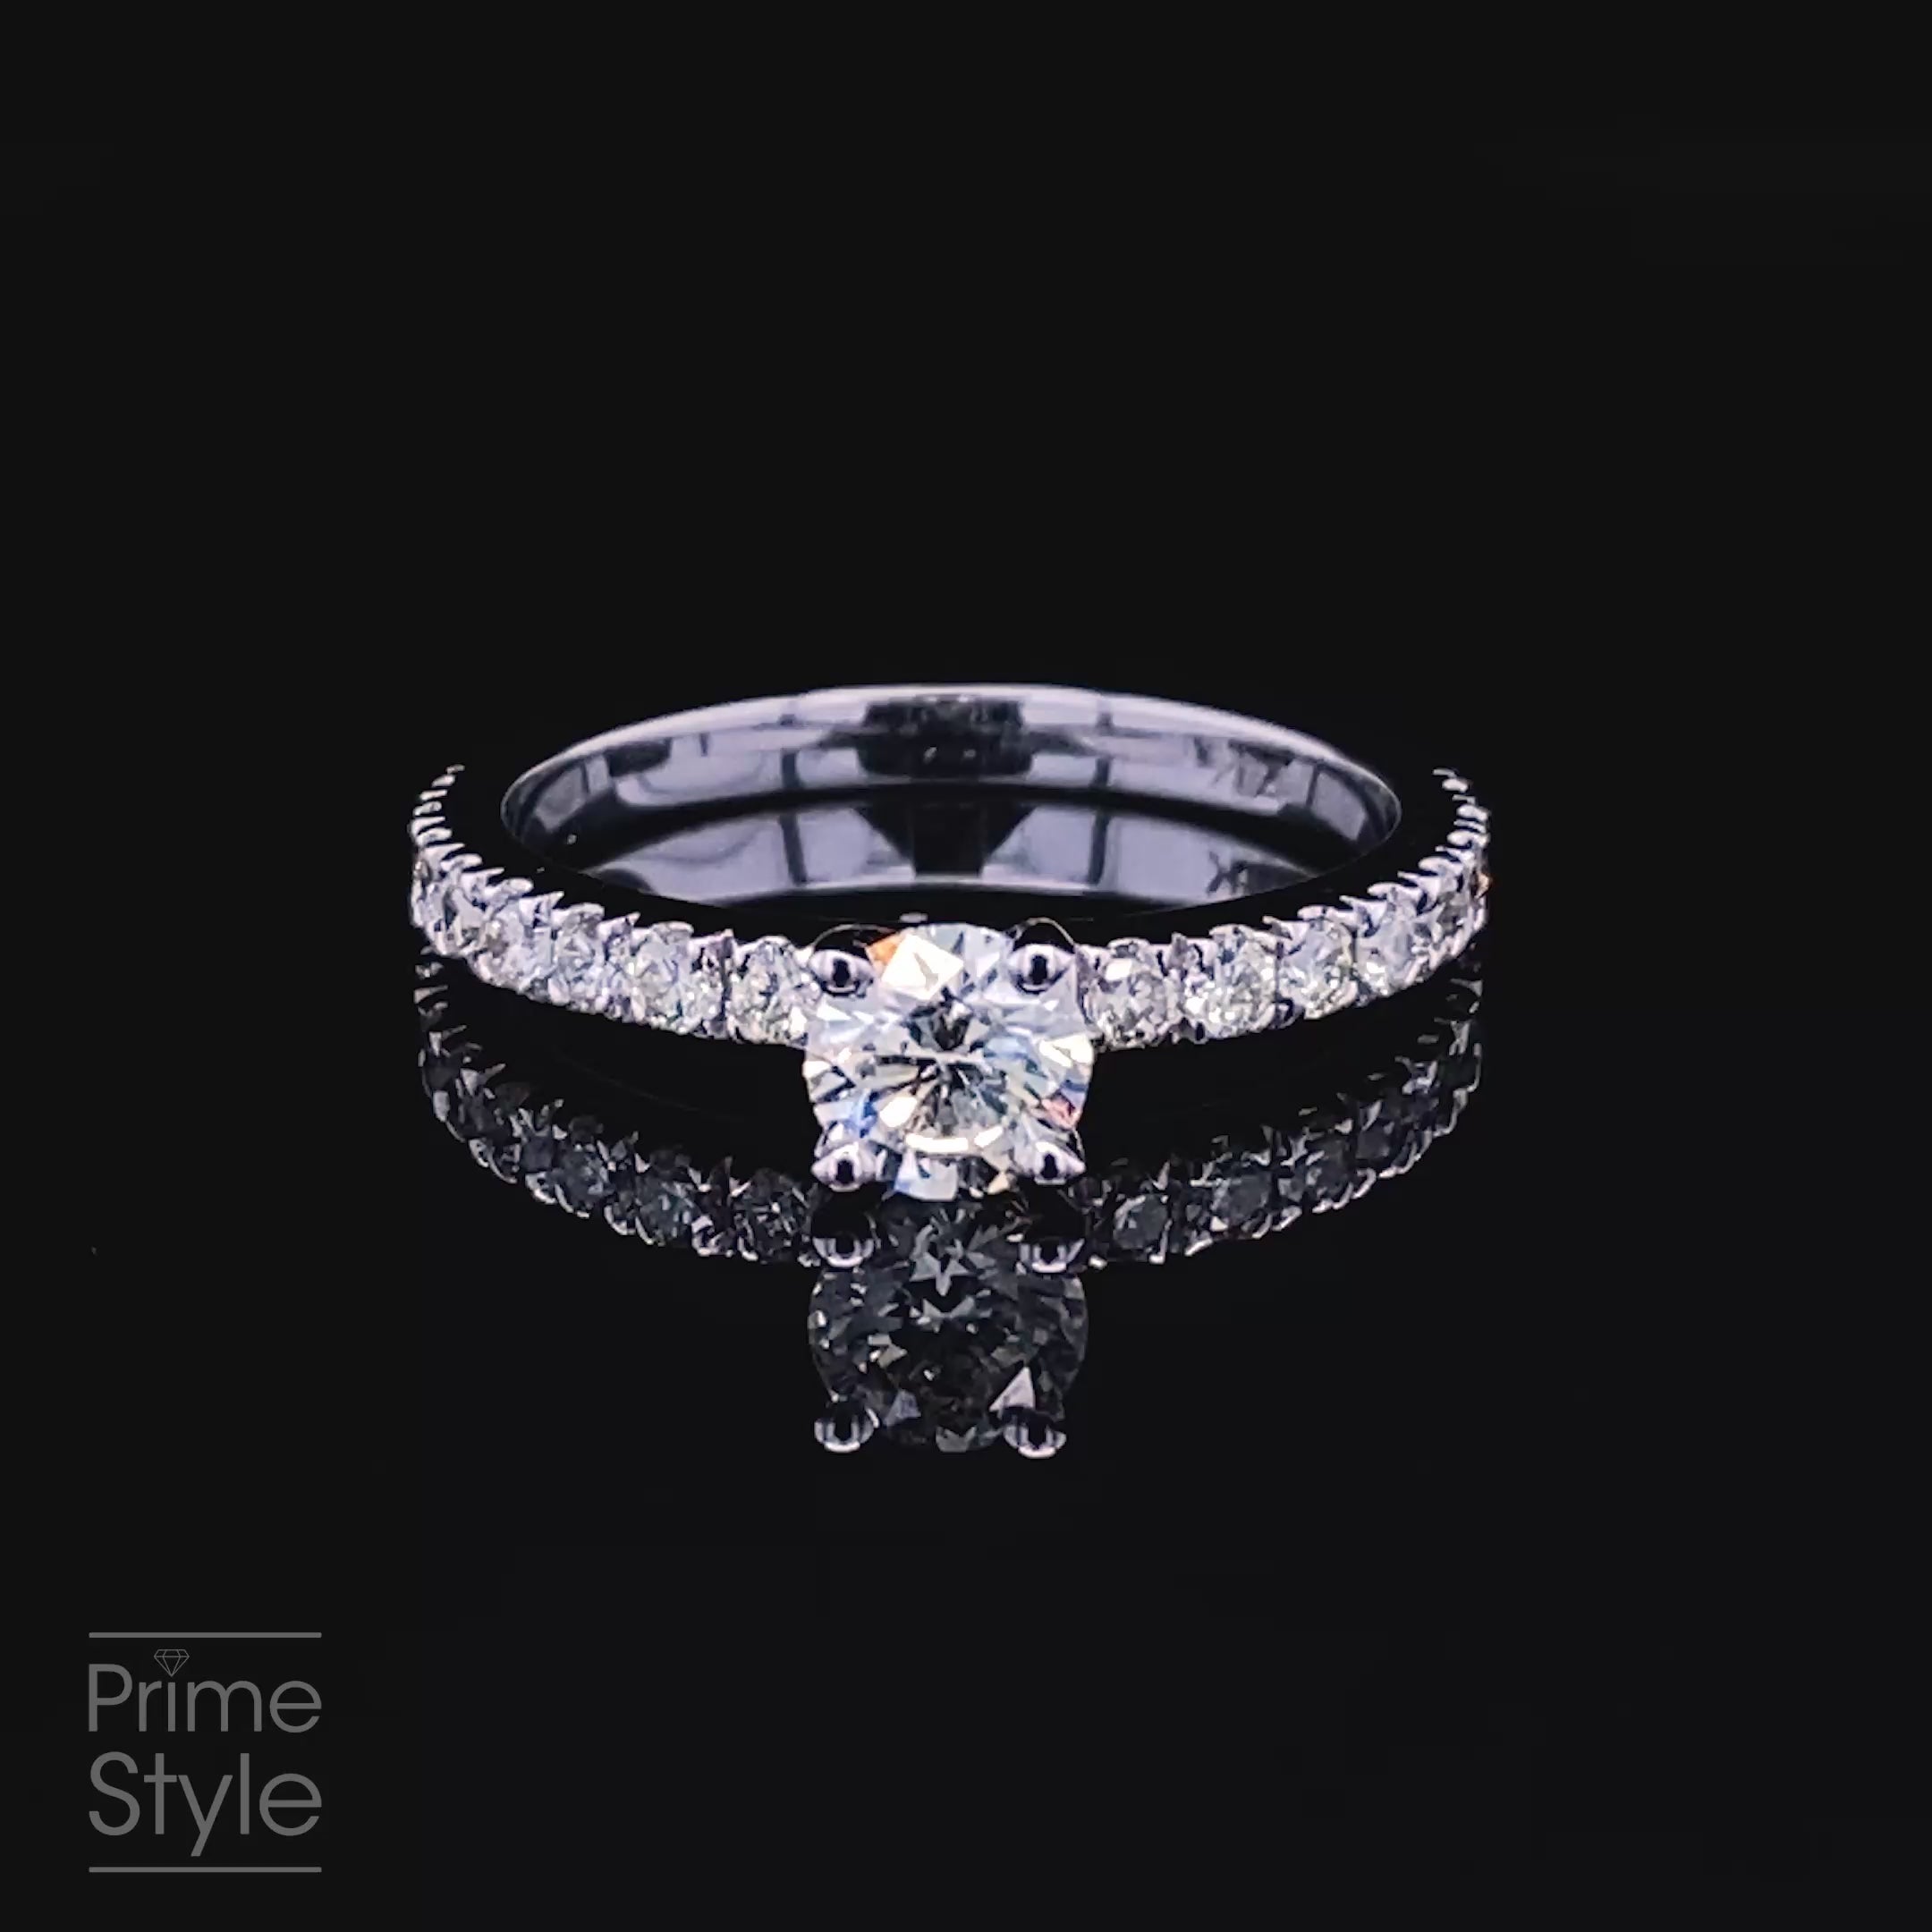 Modern 0.85 CT Round Cut Diamond Engagement Ring in 14KT White Gold